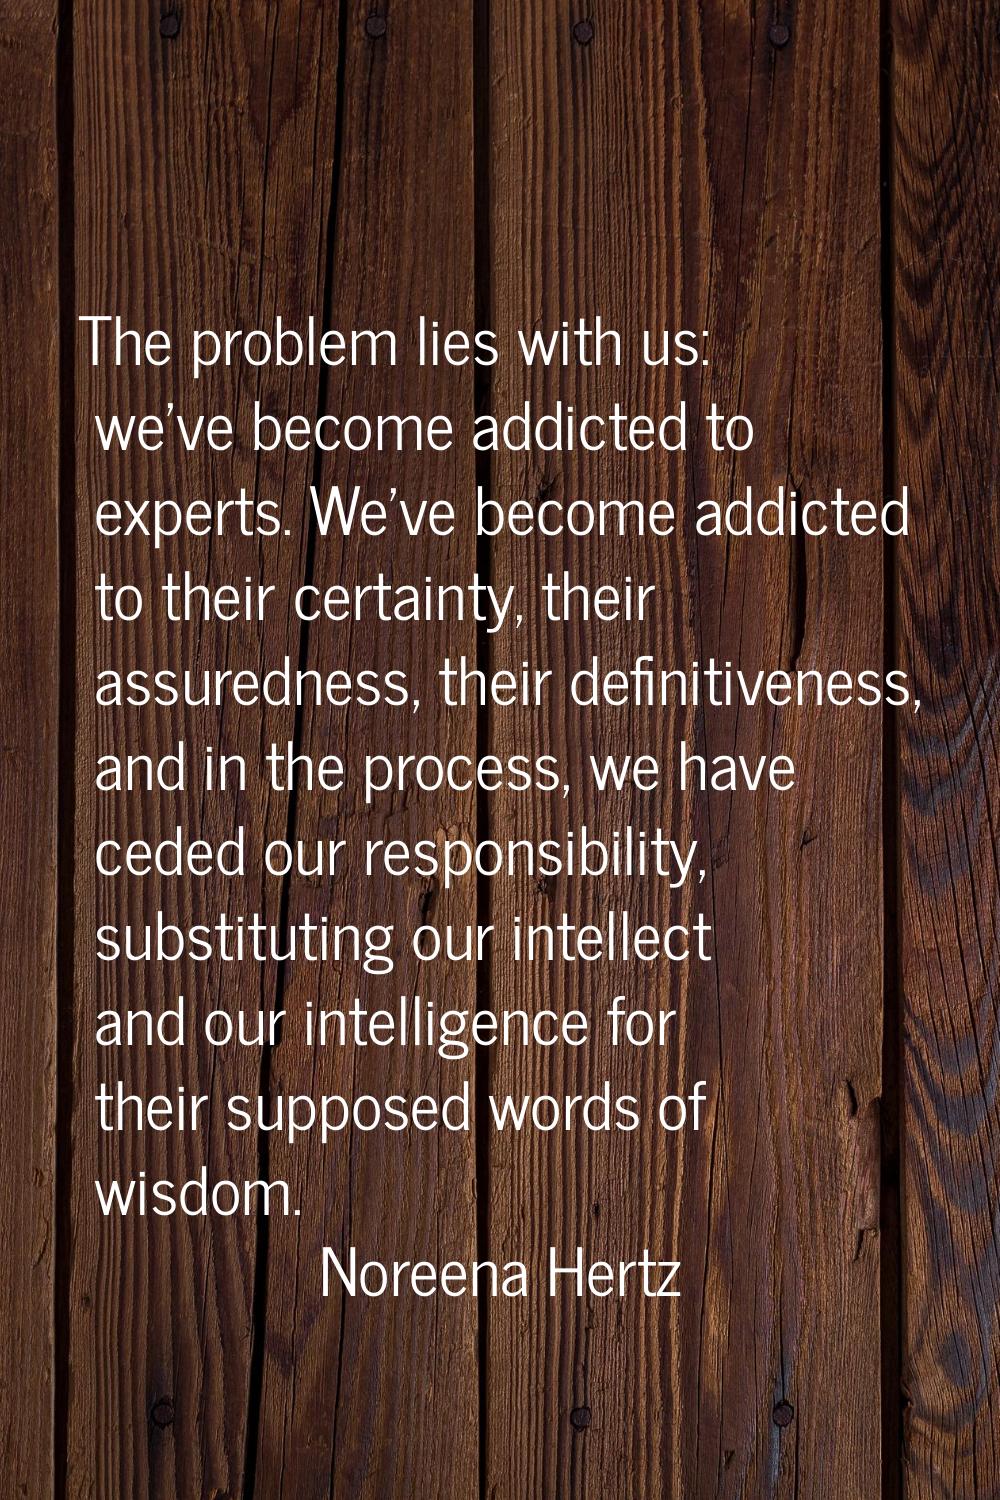 The problem lies with us: we've become addicted to experts. We've become addicted to their certaint